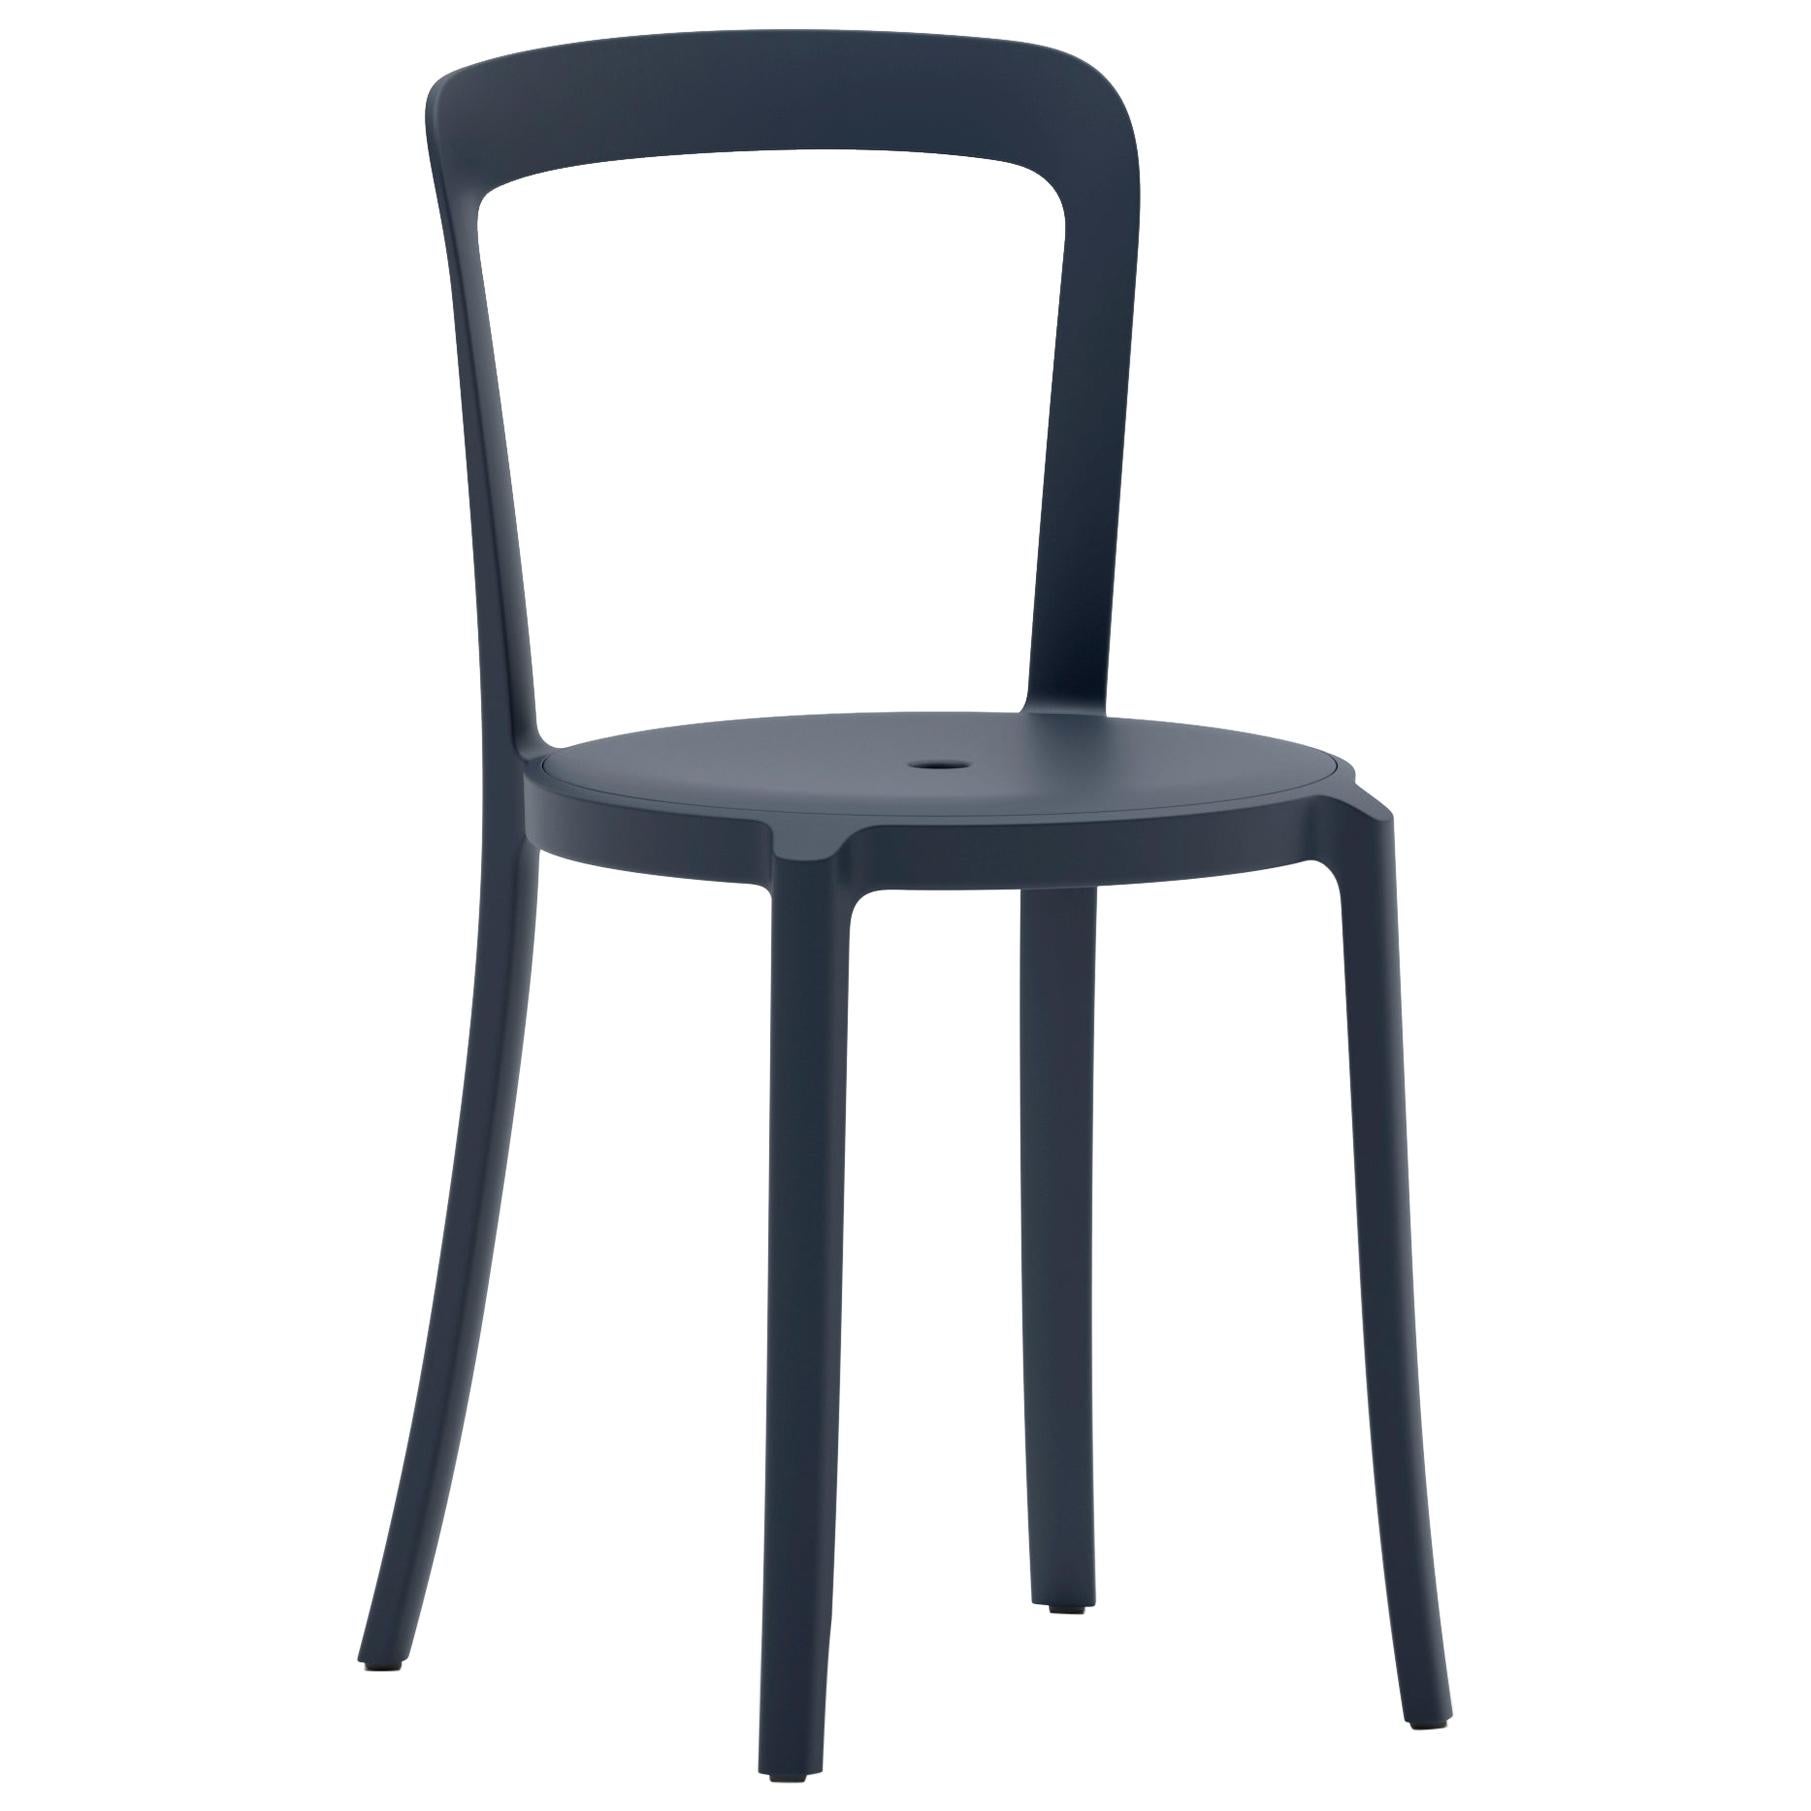 Emeco On & On Stacking Chair in Dark Blue Plastic by Barber & Osgerby